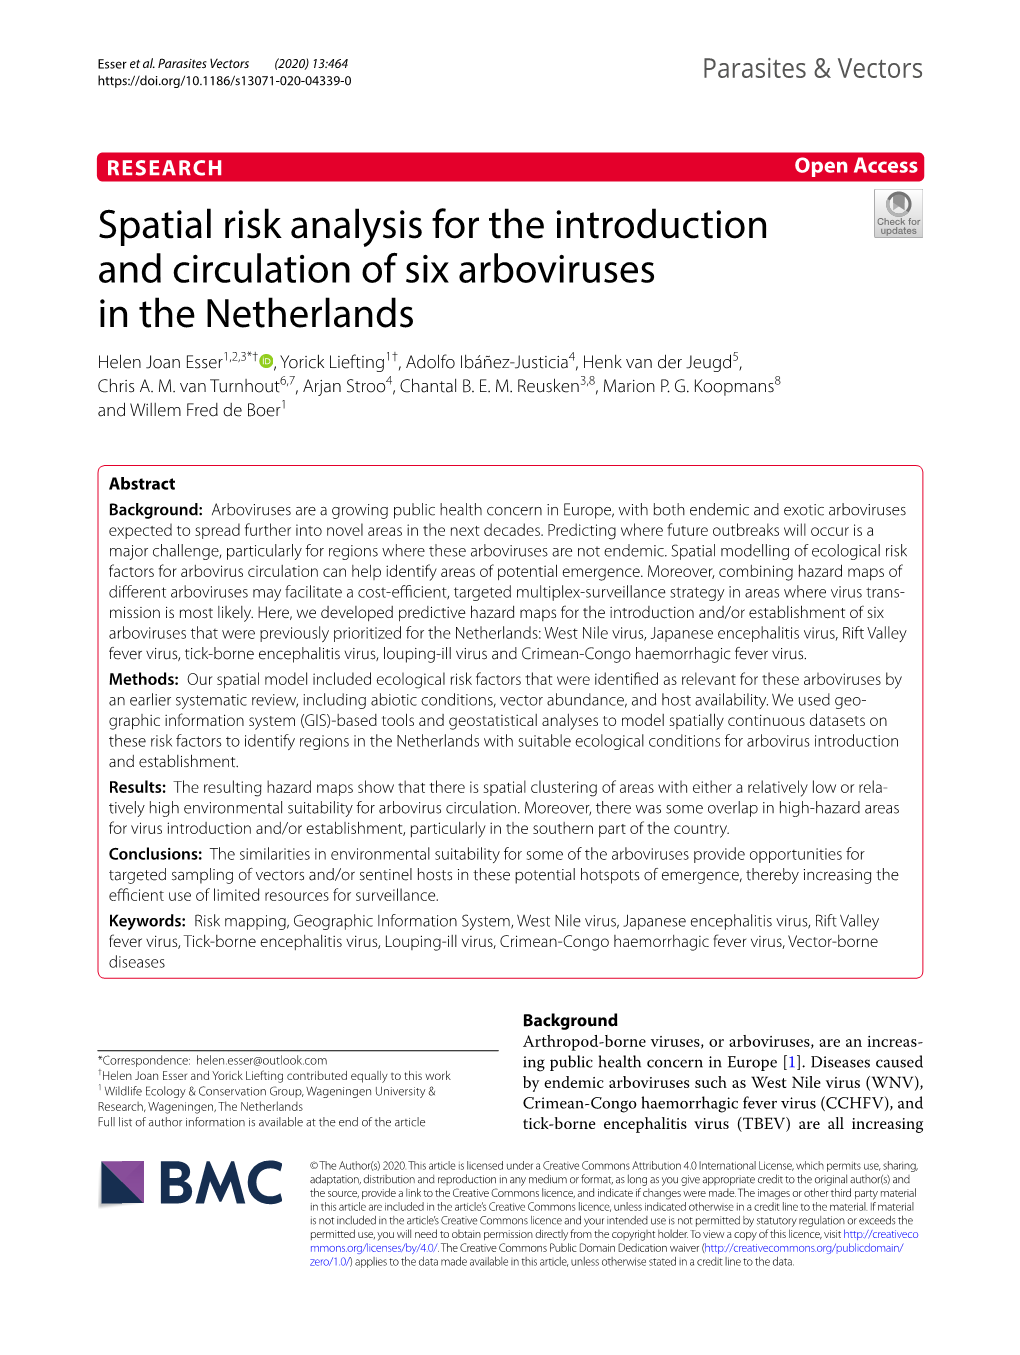 Spatial Risk Analysis for the Introduction and Circulation of Six